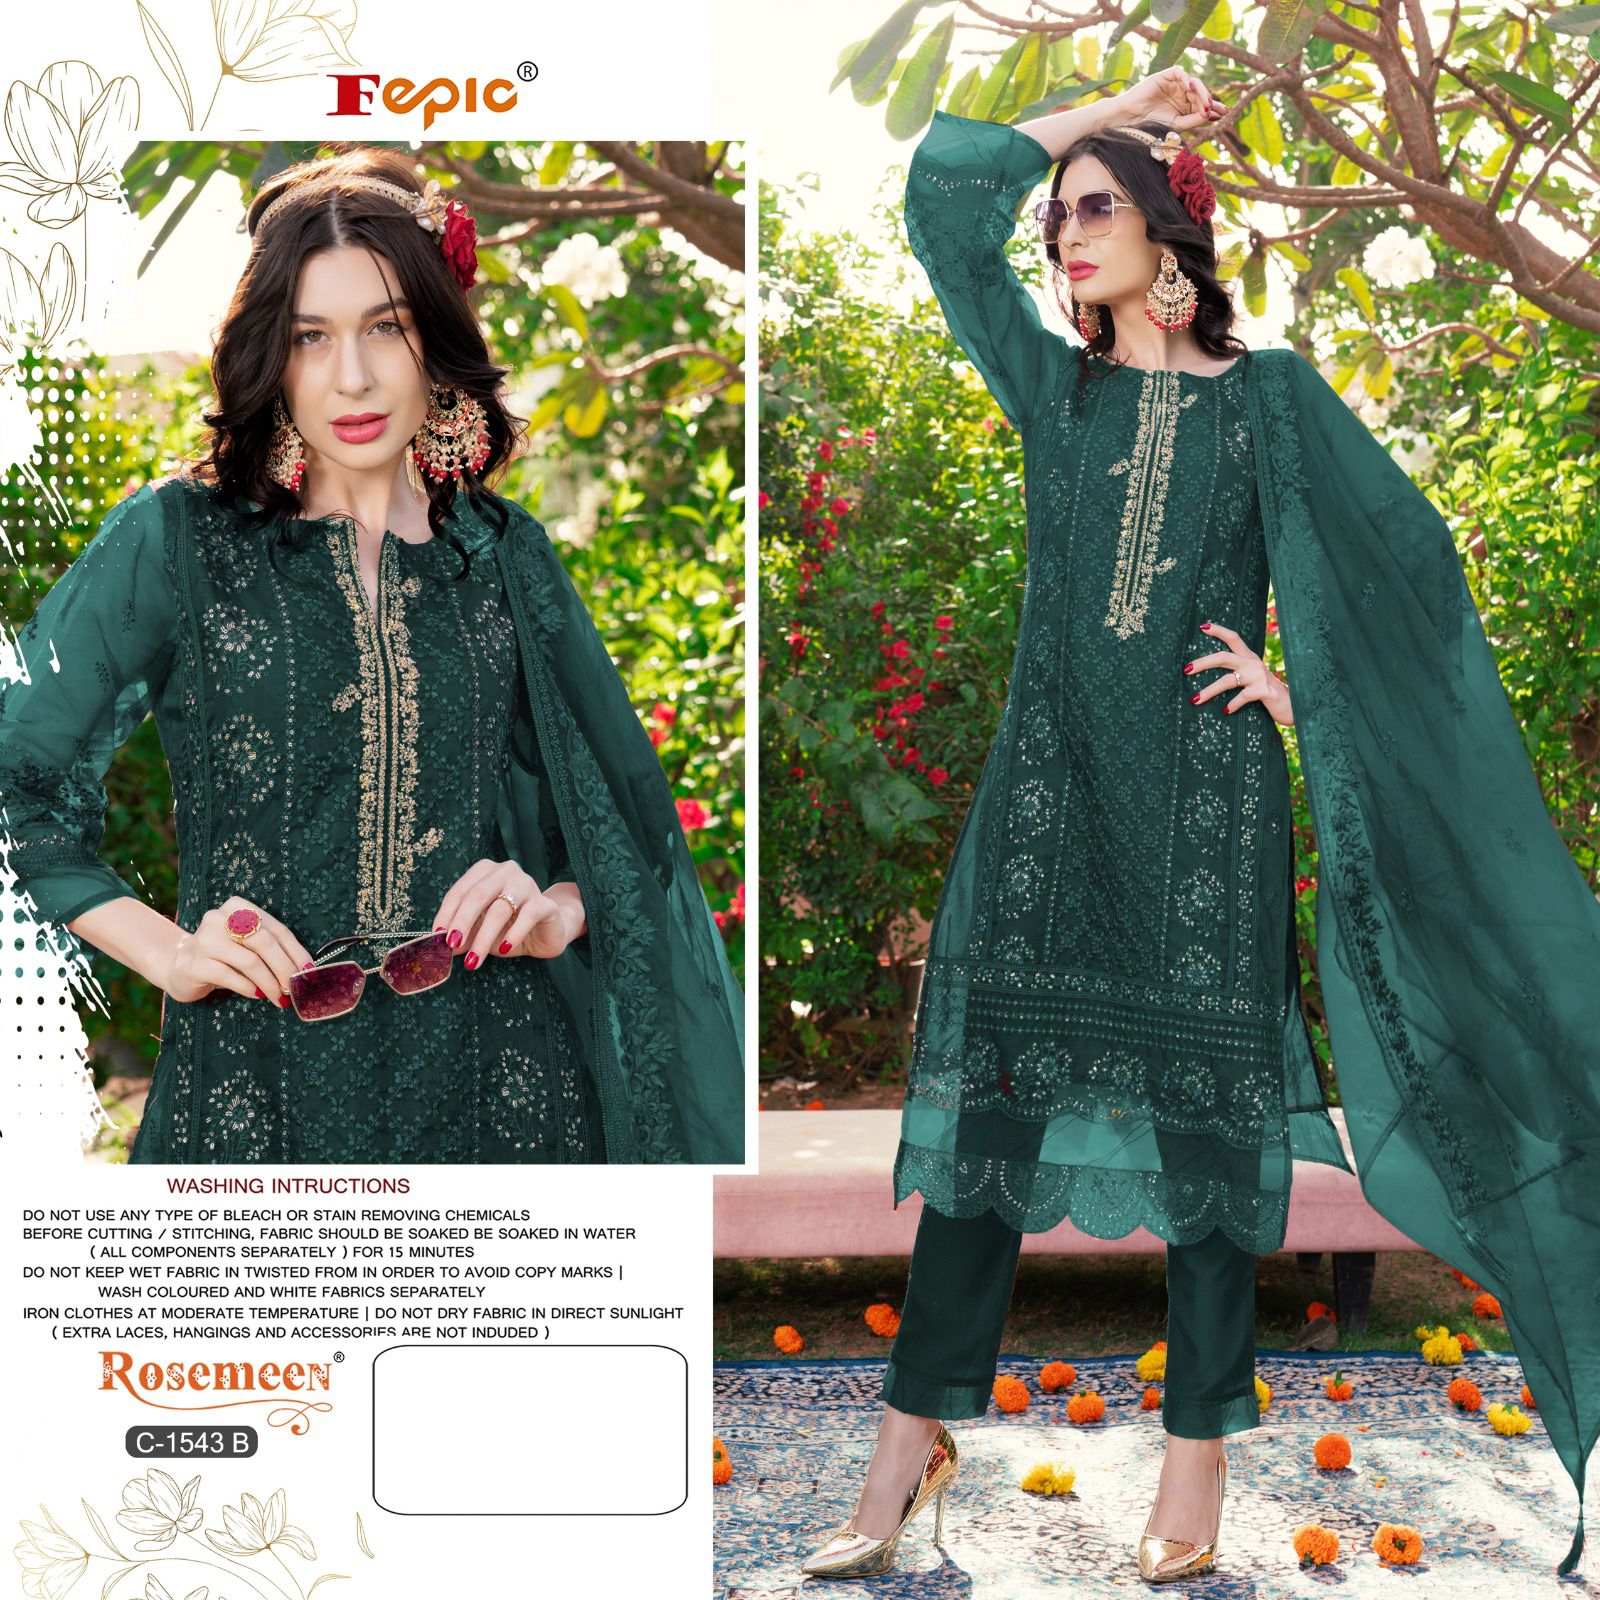 FEPIC 1543 B PAKISTANI SUITS ONLINE IN INDIA